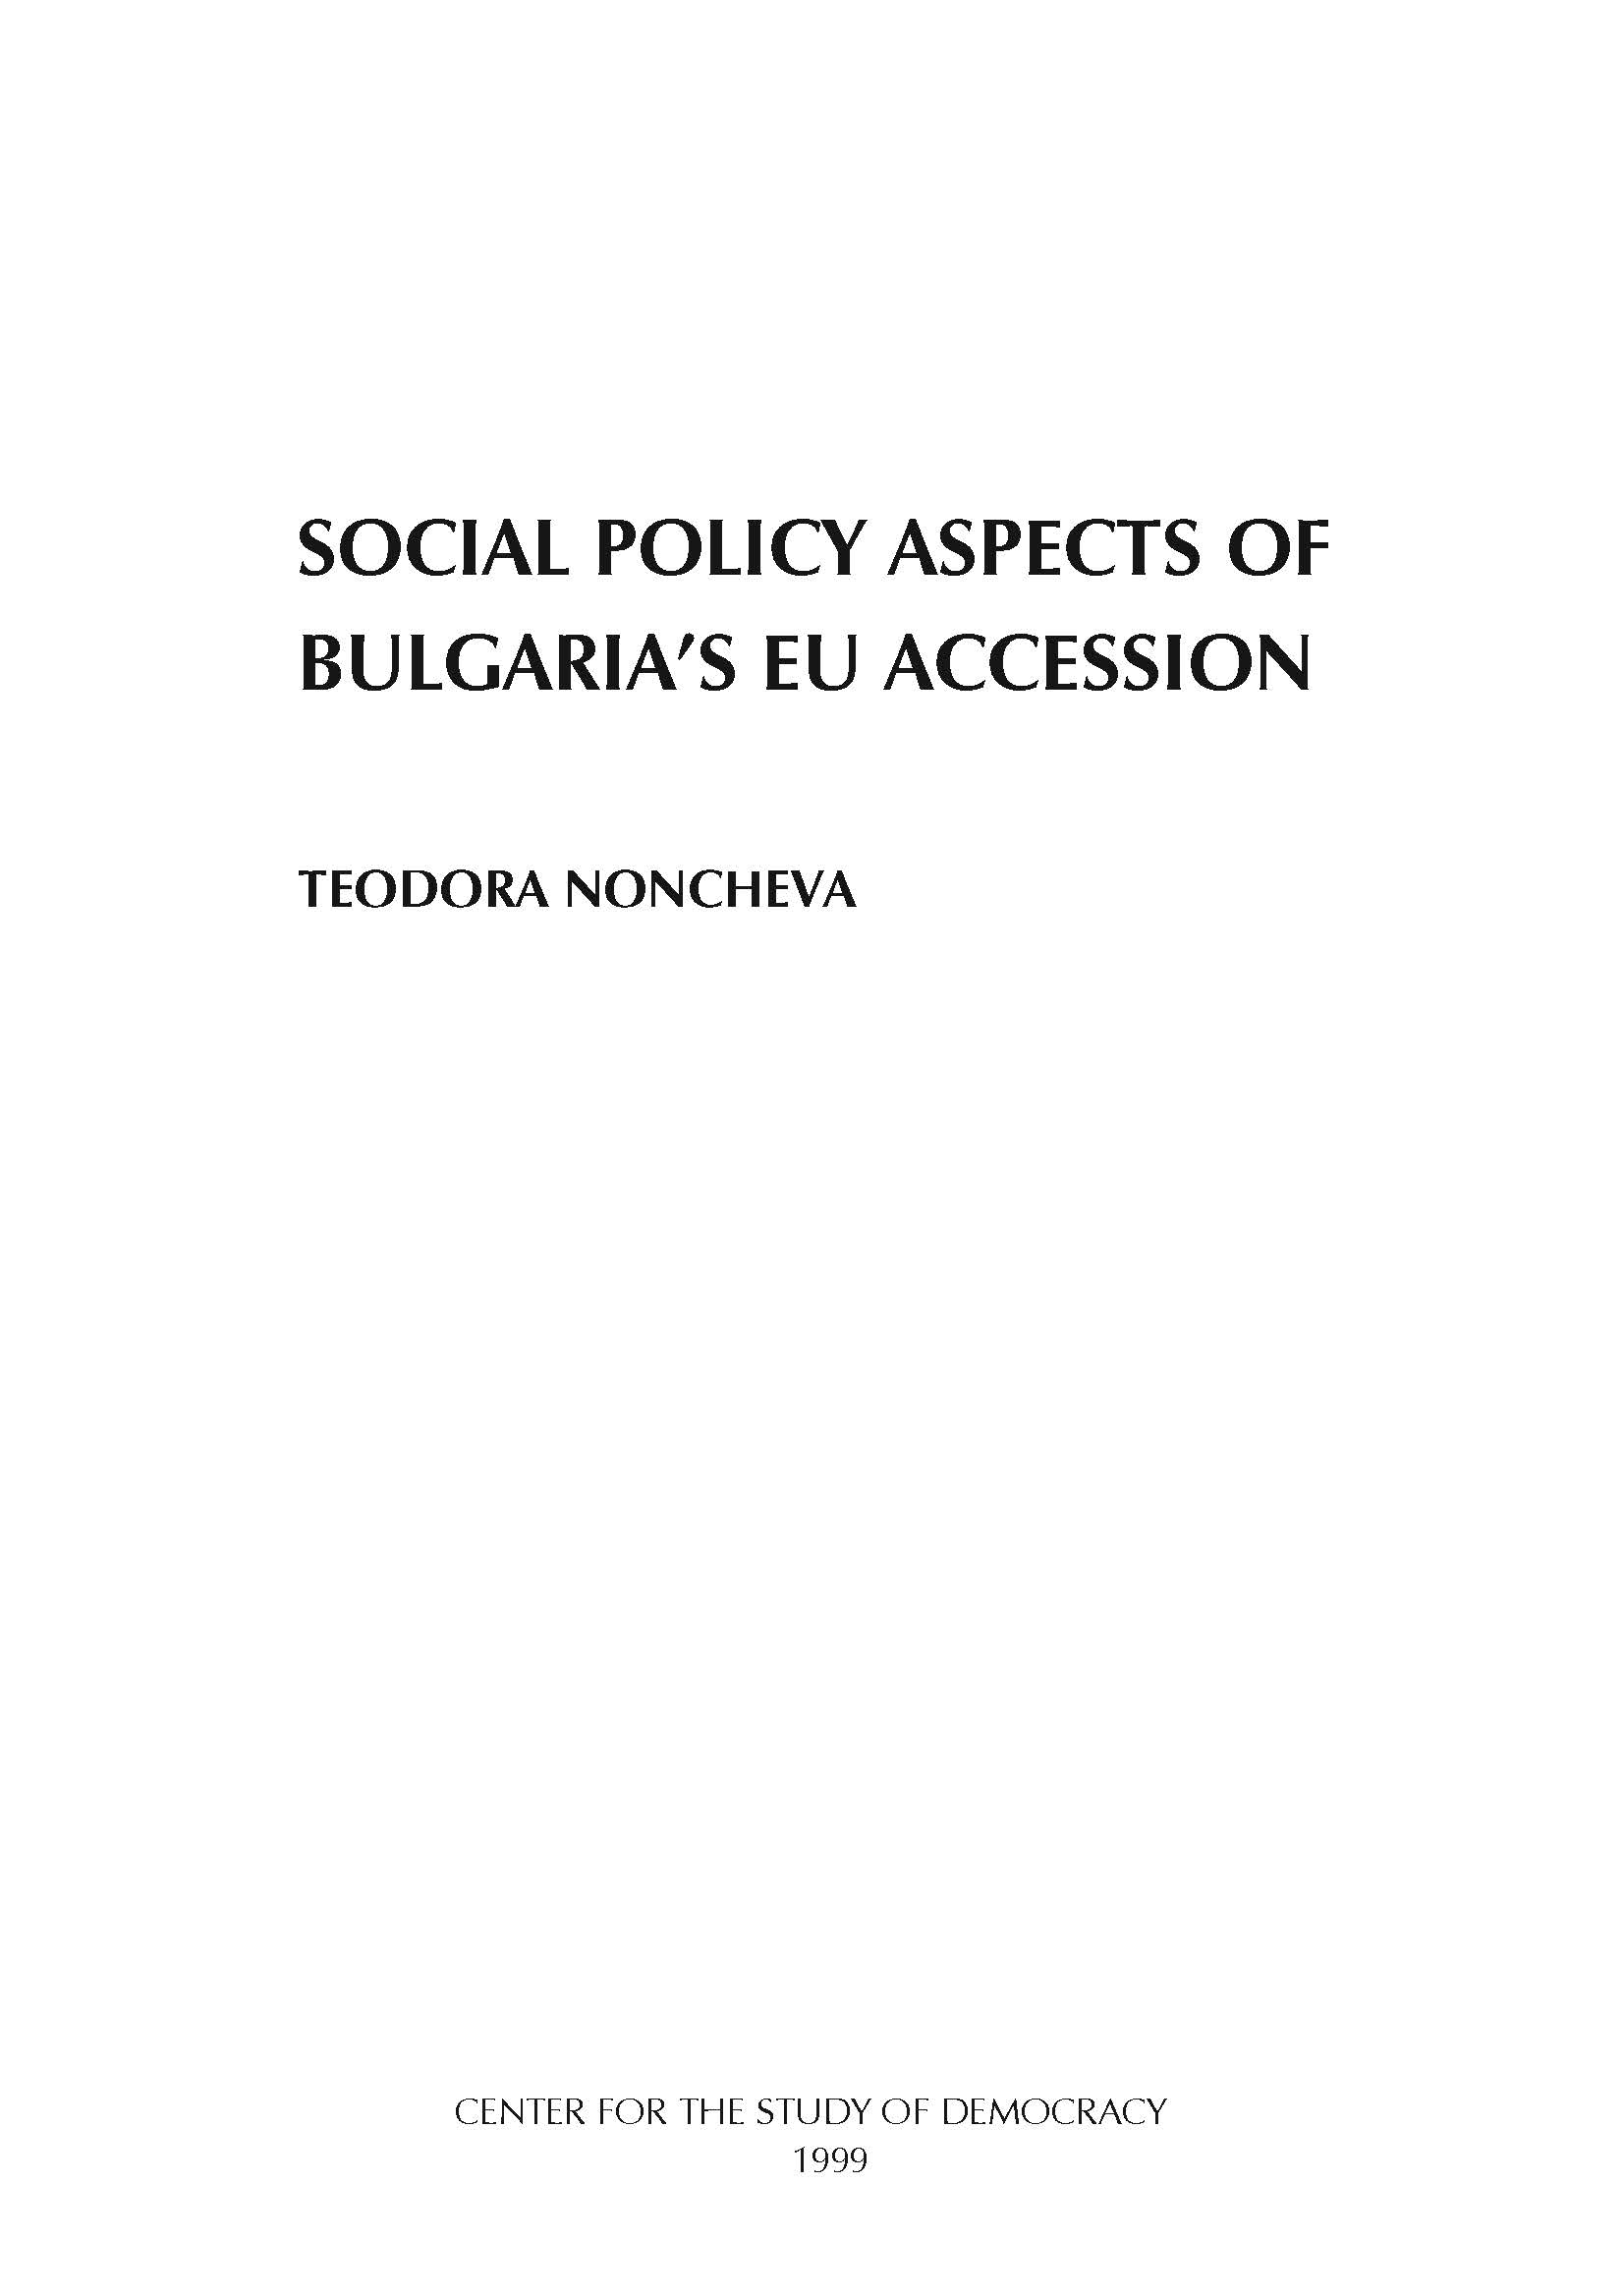 CSD-Report 02 - Social Policy Aspects of Bulgaria's EU Accession